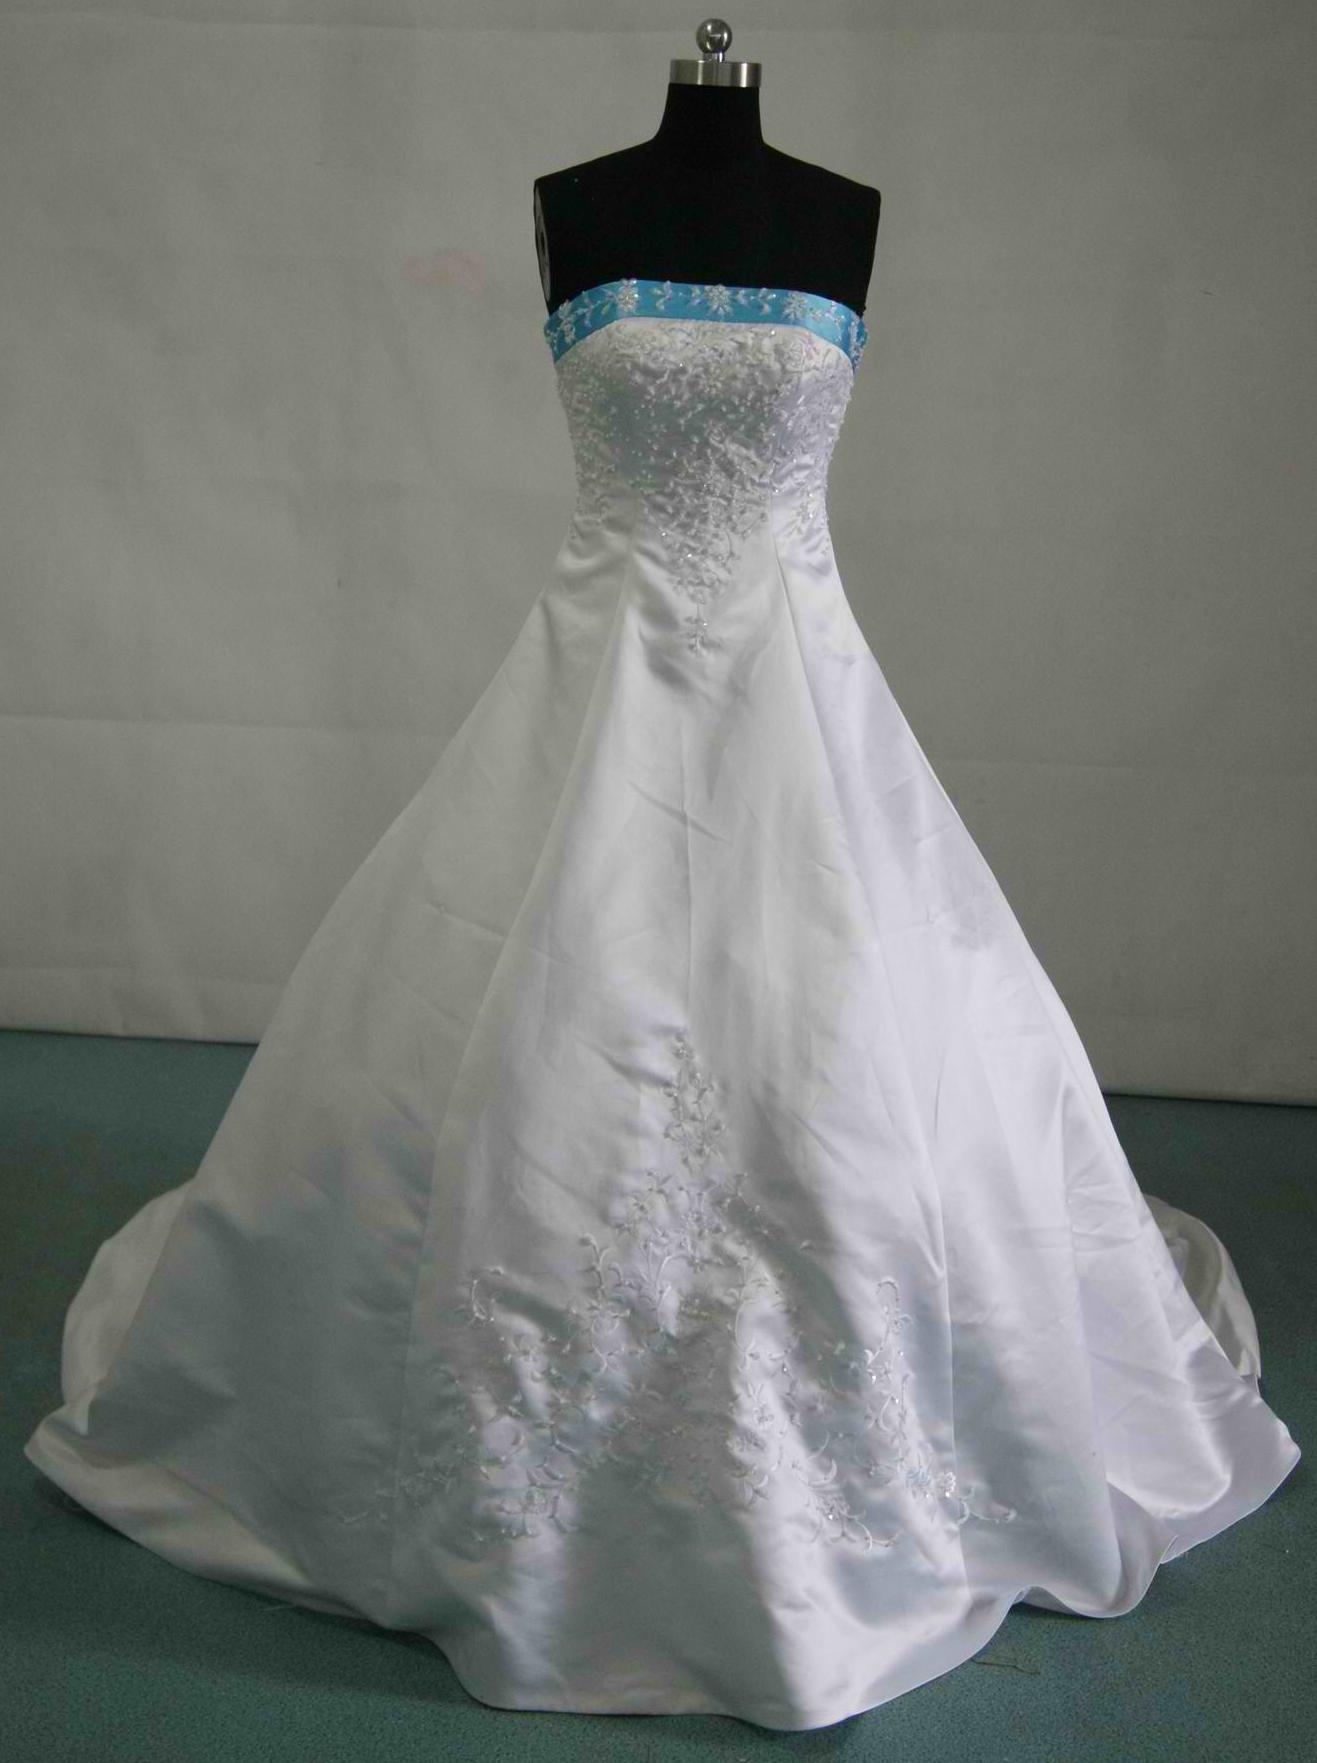 white and pool blue wedding gown